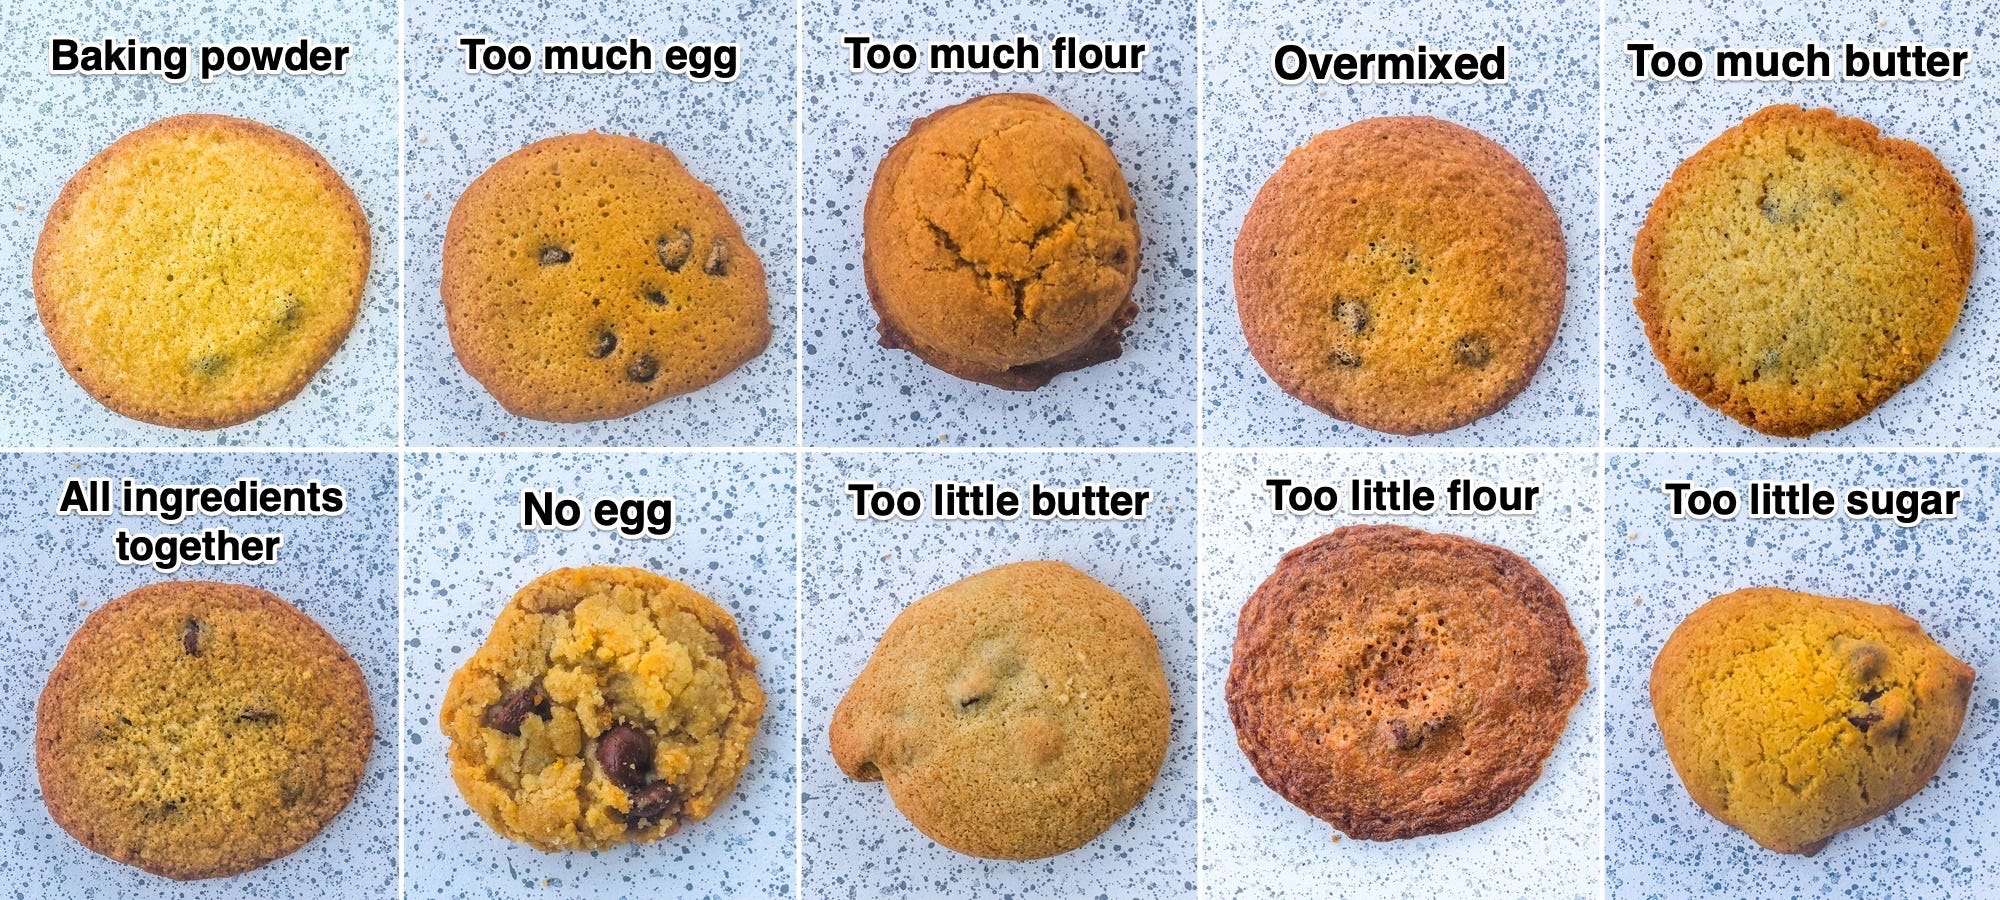 This graphic showing how cookies can go wrong is proof you need to be